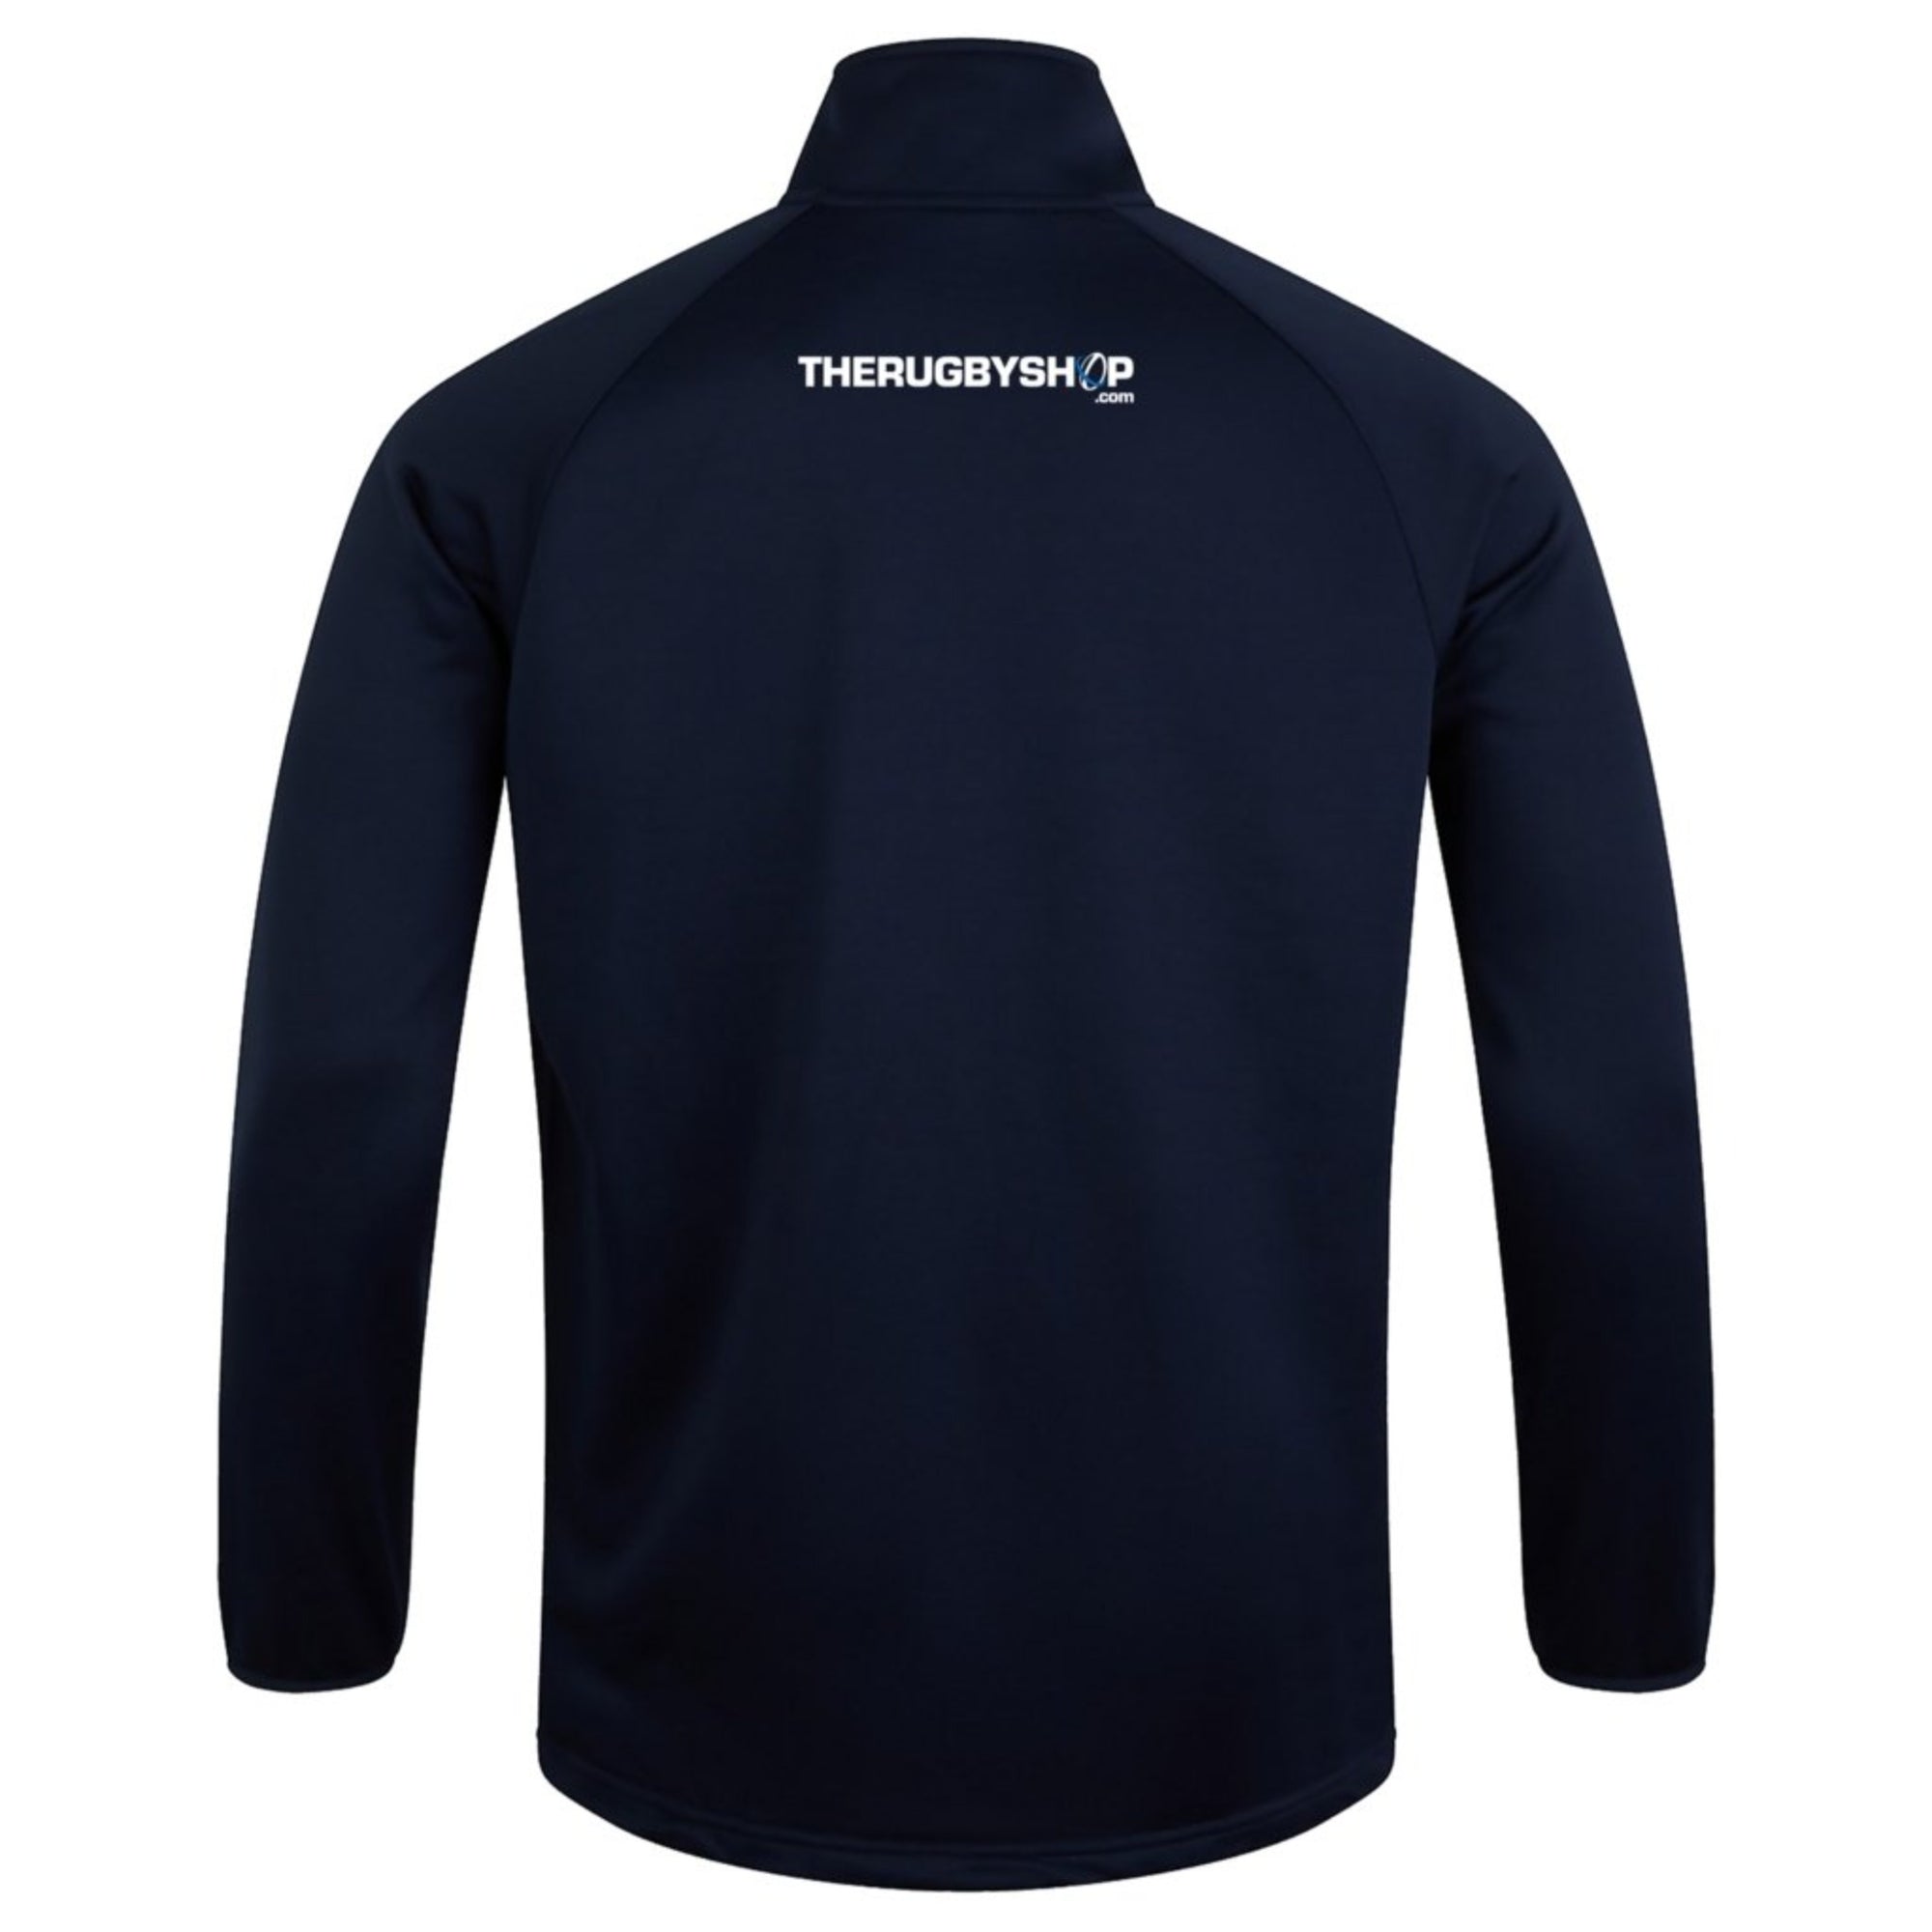 Rugby Ontario Referees CCC 1/4 Zip Mid-Layer Training Top - www.therugbyshop.com www.therugbyshop.com UNISEX / NAVY / XS TRS Distribution Canada 1/4 ZIPS Rugby Ontario Referees CCC 1/4 Zip Mid-Layer Training Top